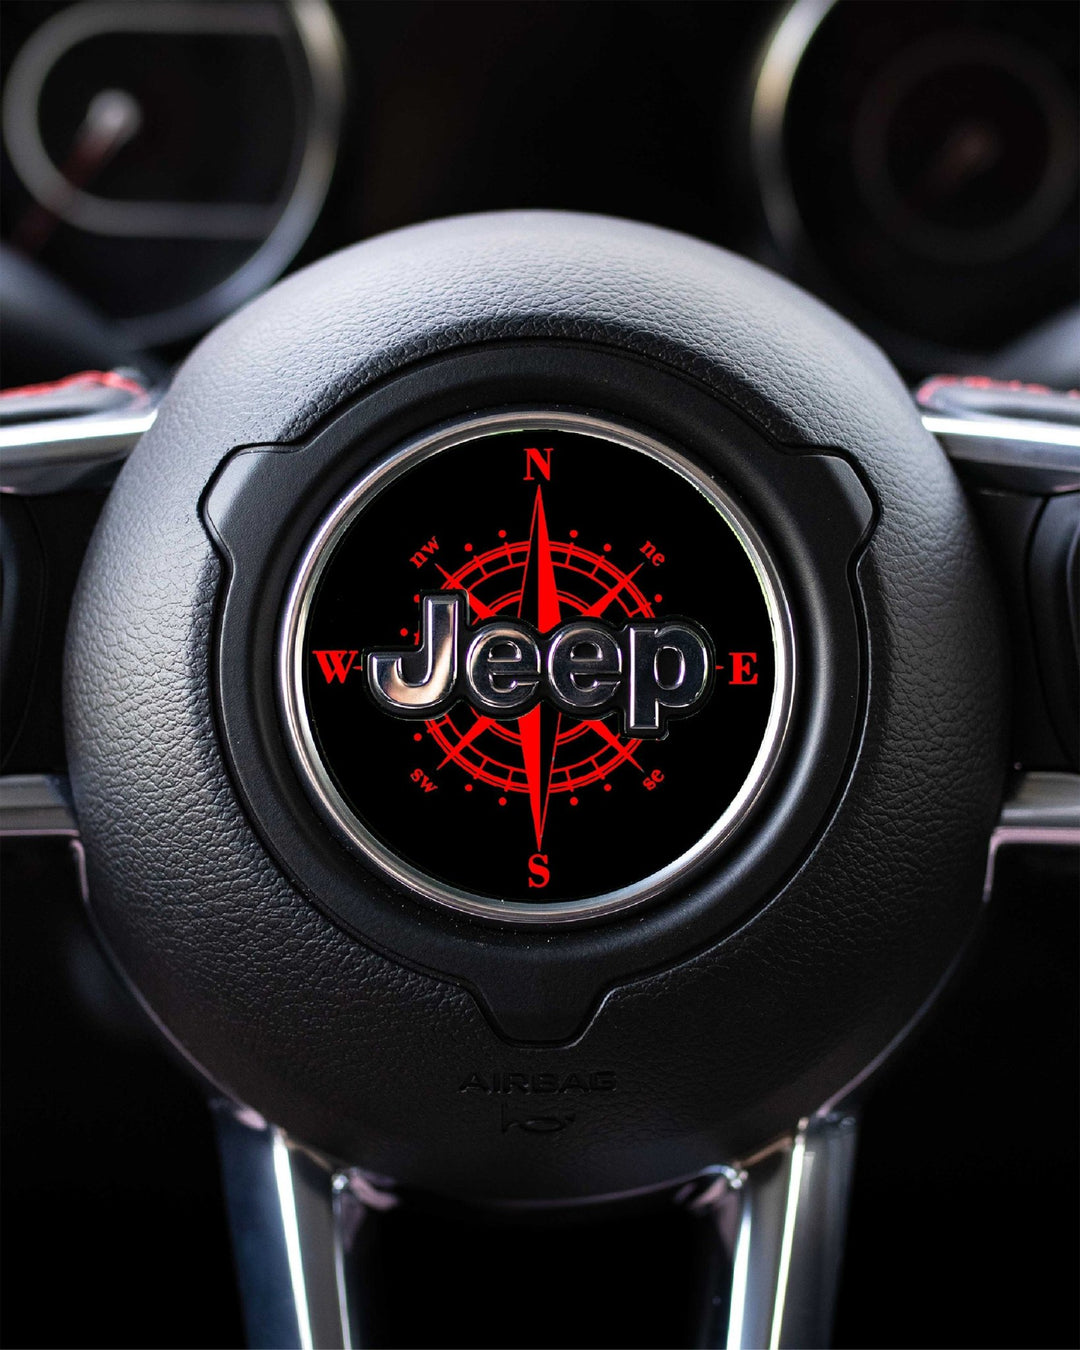 Compass Print Steering Wheel Decal for Jeep